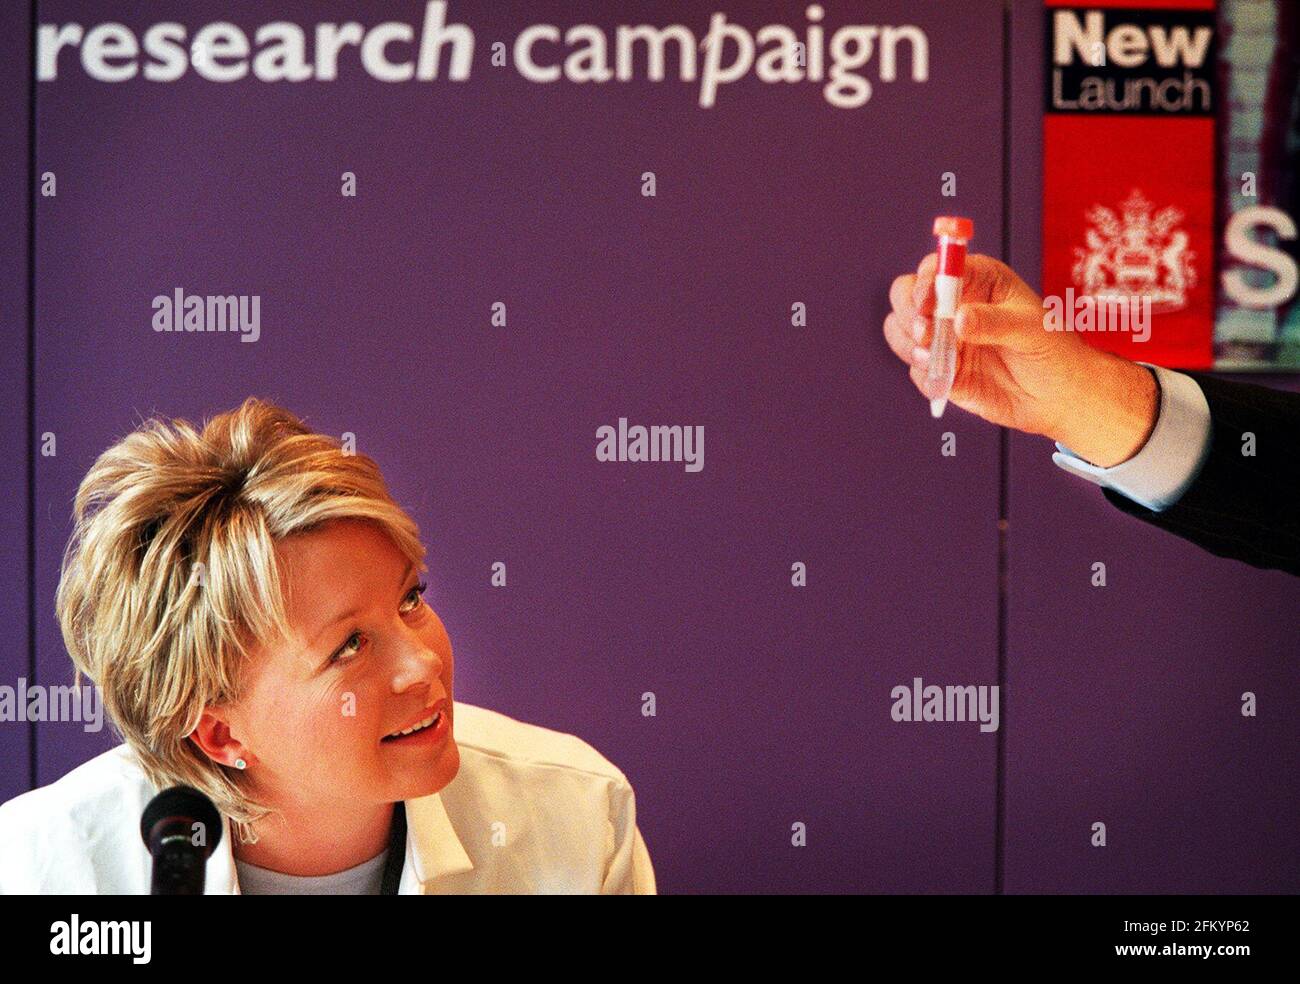 Kirsty Young looks on with intrest as her own DNA forms in a test tube. Kirsty took part inm a scientific experiment at the Cancer Research Campaign's national office to highlight the importance of research and raise awareness of how The Campaign will be benifiting from The Schroder Medical Discovery Fund.Pic Stock Photo